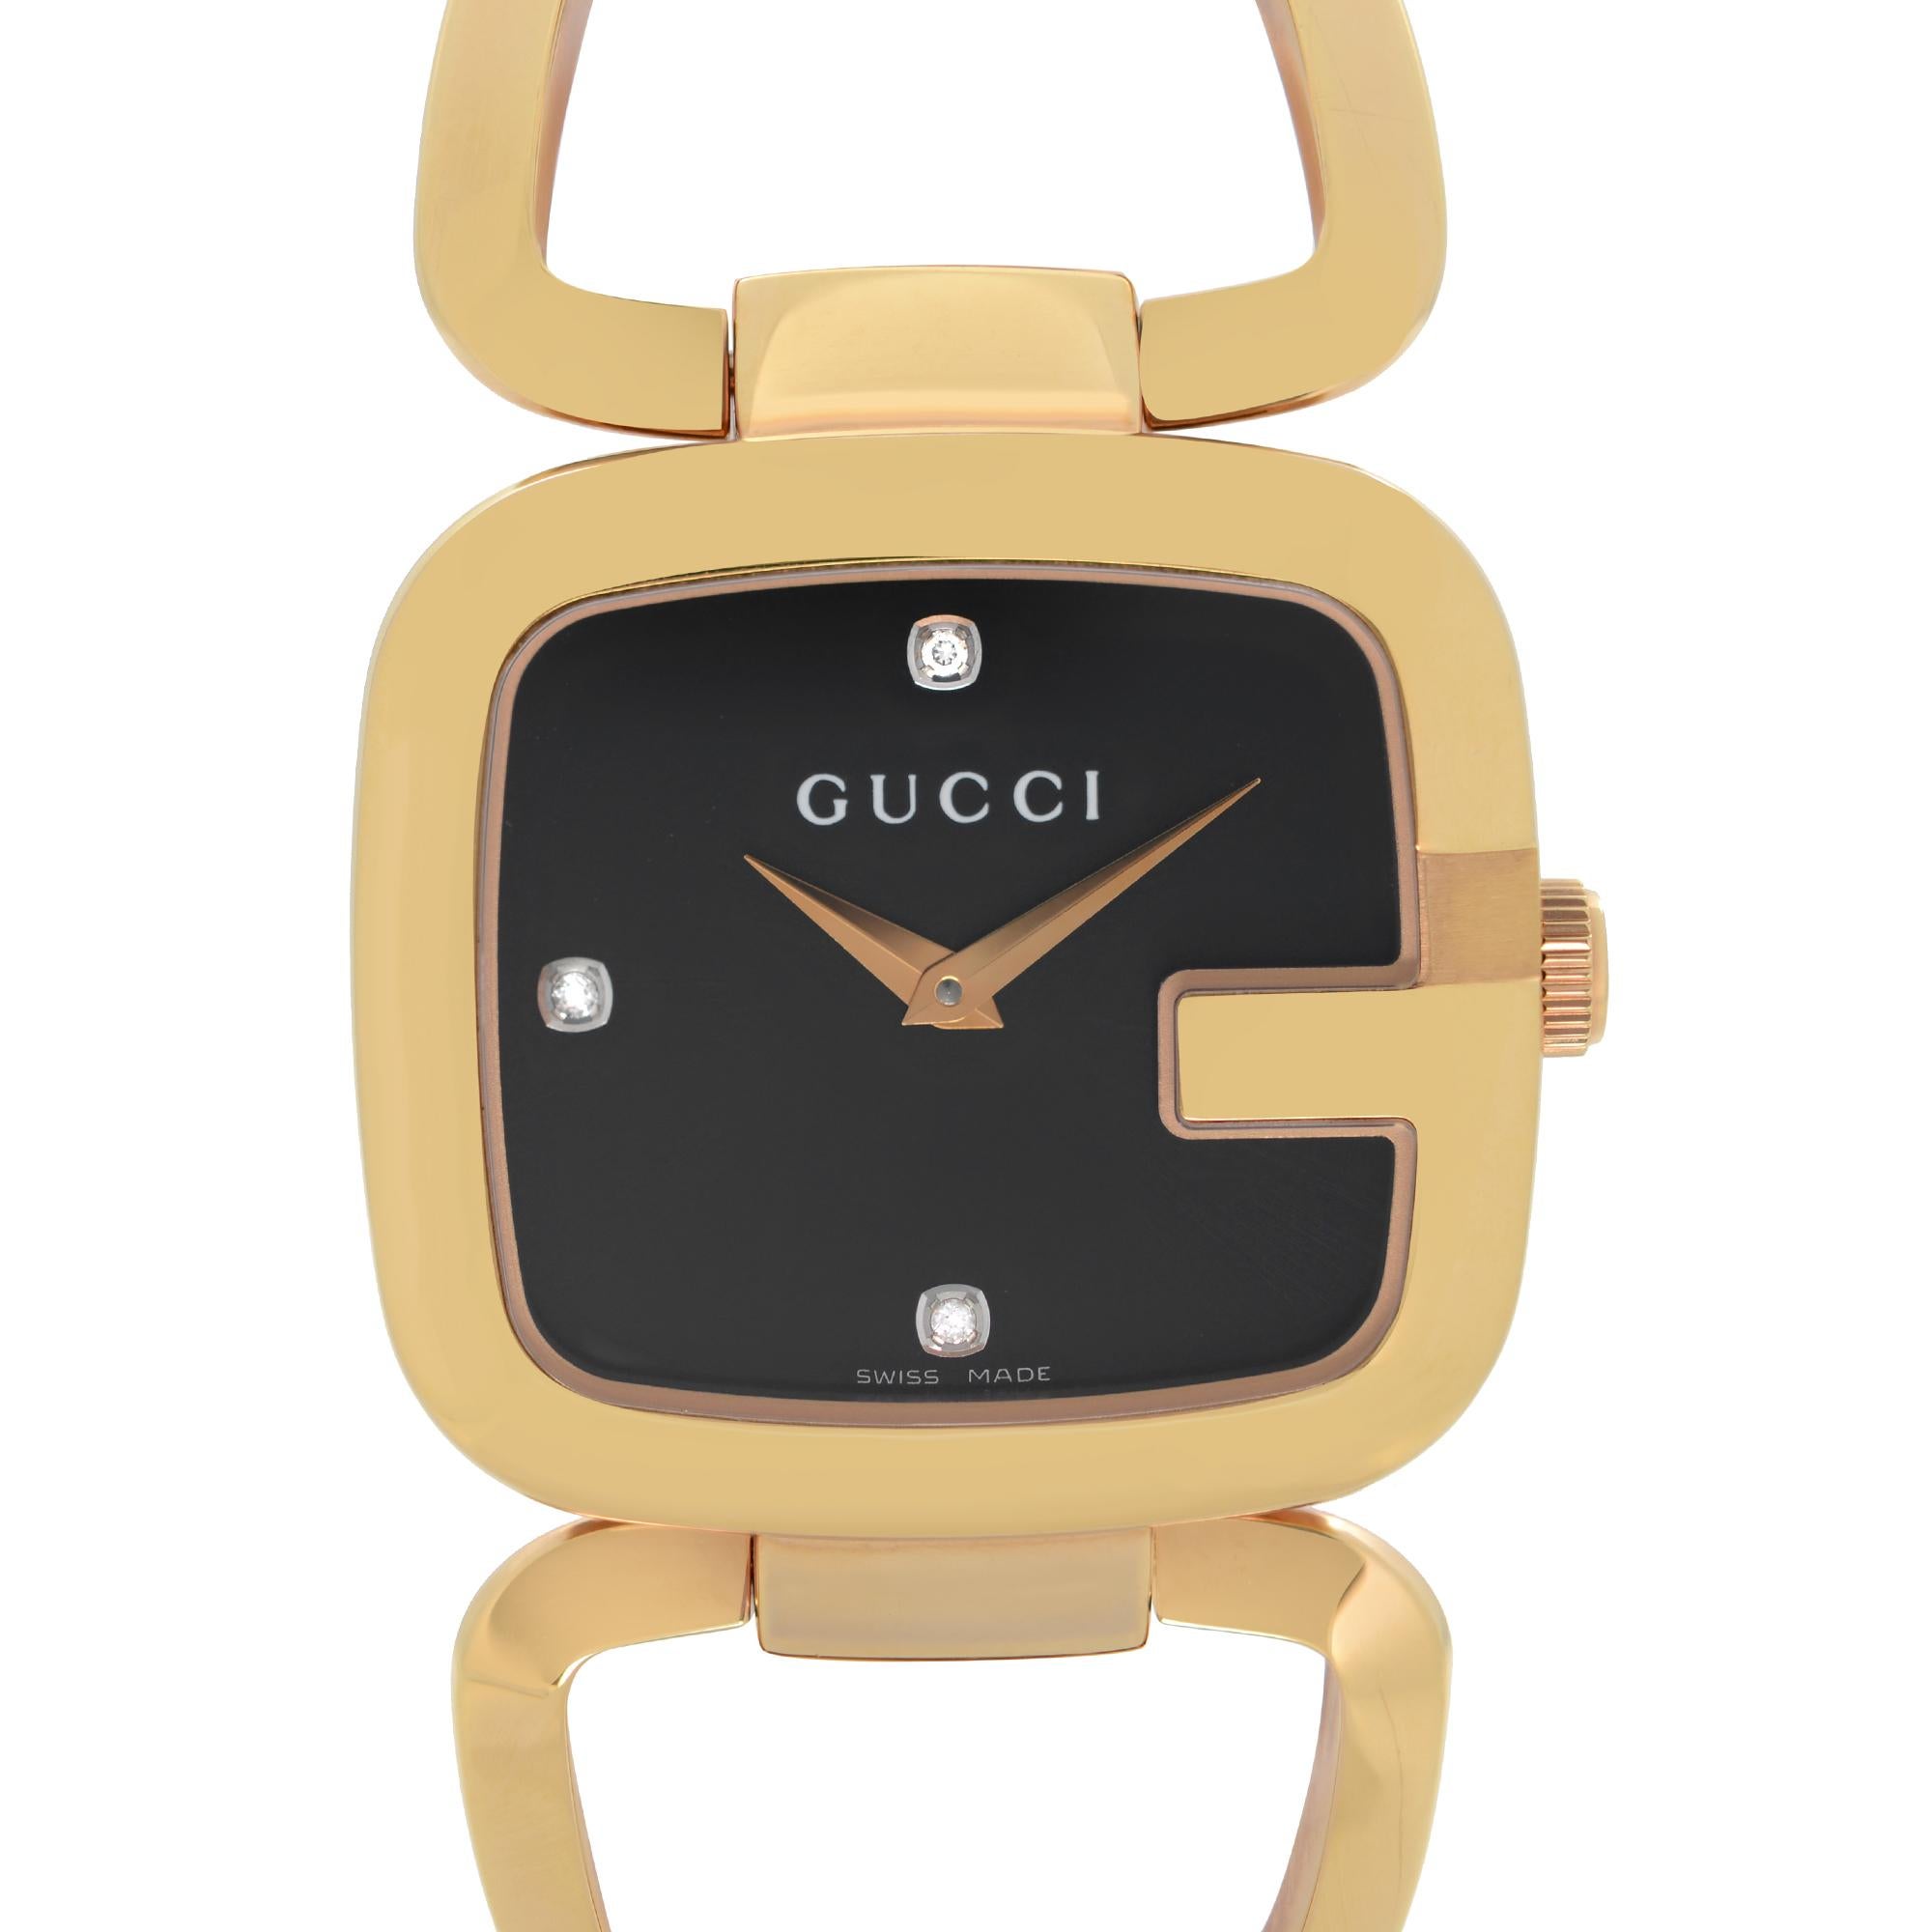 Pre-Owned Gucci G Black Diamond Dial Ladies Quartz Watch YA125409. Timepiece Has Minor Scratches. This Beautiful Timepiece Features: Rose Gold-Tone Stainless Steel Case and Bracelet. Black Dial with Rose Gold-Tone & Diamond Hour Markers. No Original